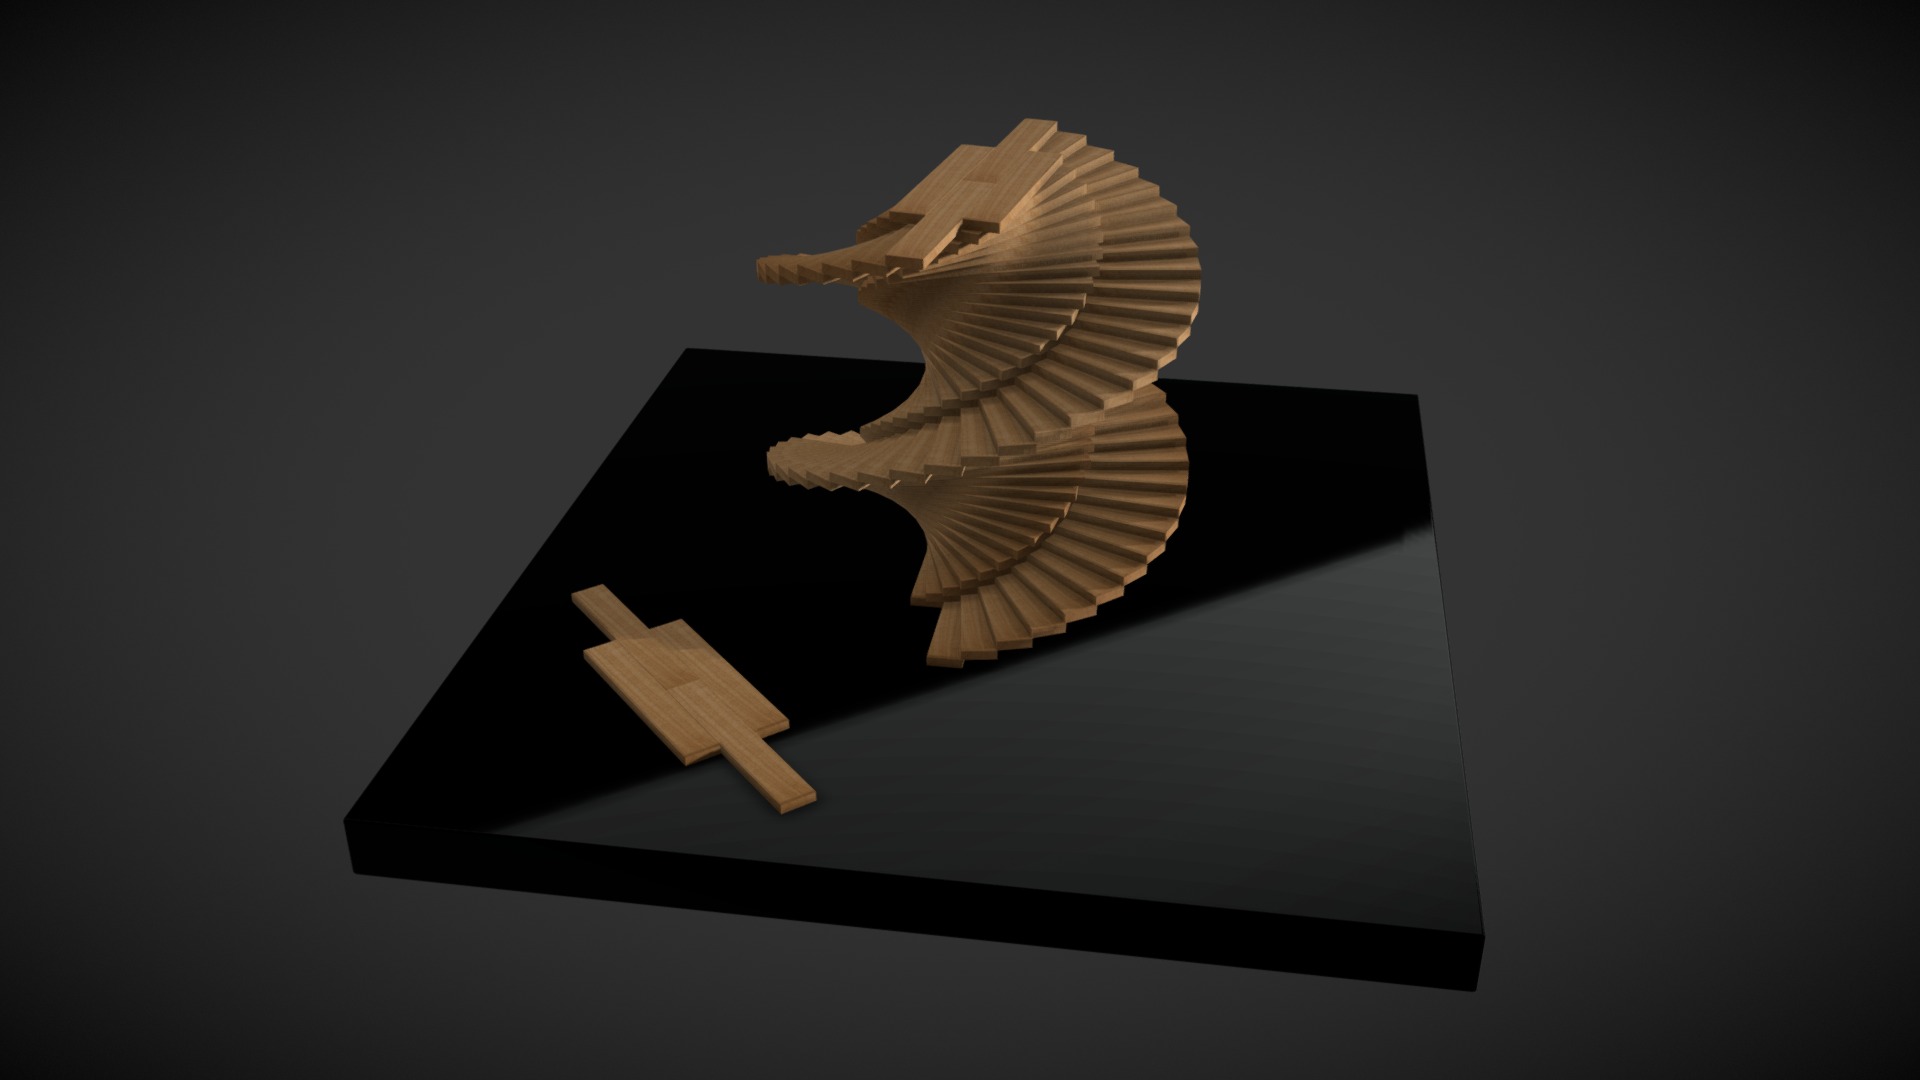 3D model Staircase in Kapla - This is a 3D model of the Staircase in Kapla. The 3D model is about a paper bird made out of paper.